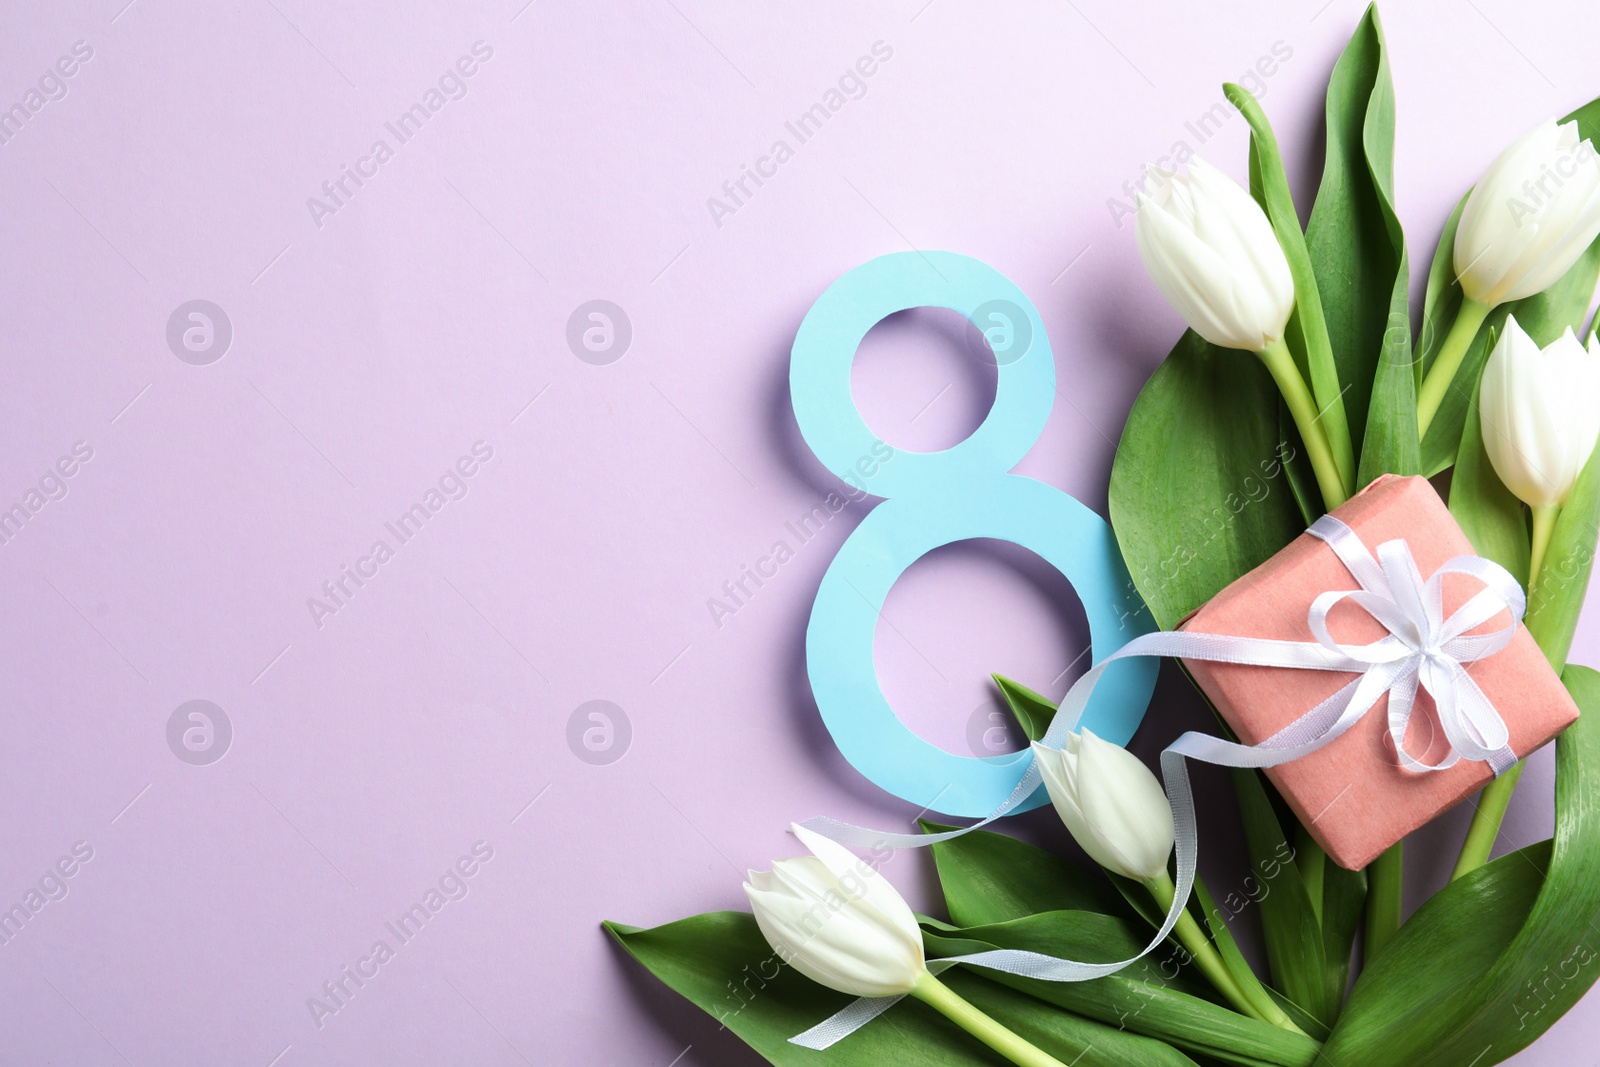 Photo of 8 March card design with tulips, gift and space for text on violet background, flat lay. International Women's Day